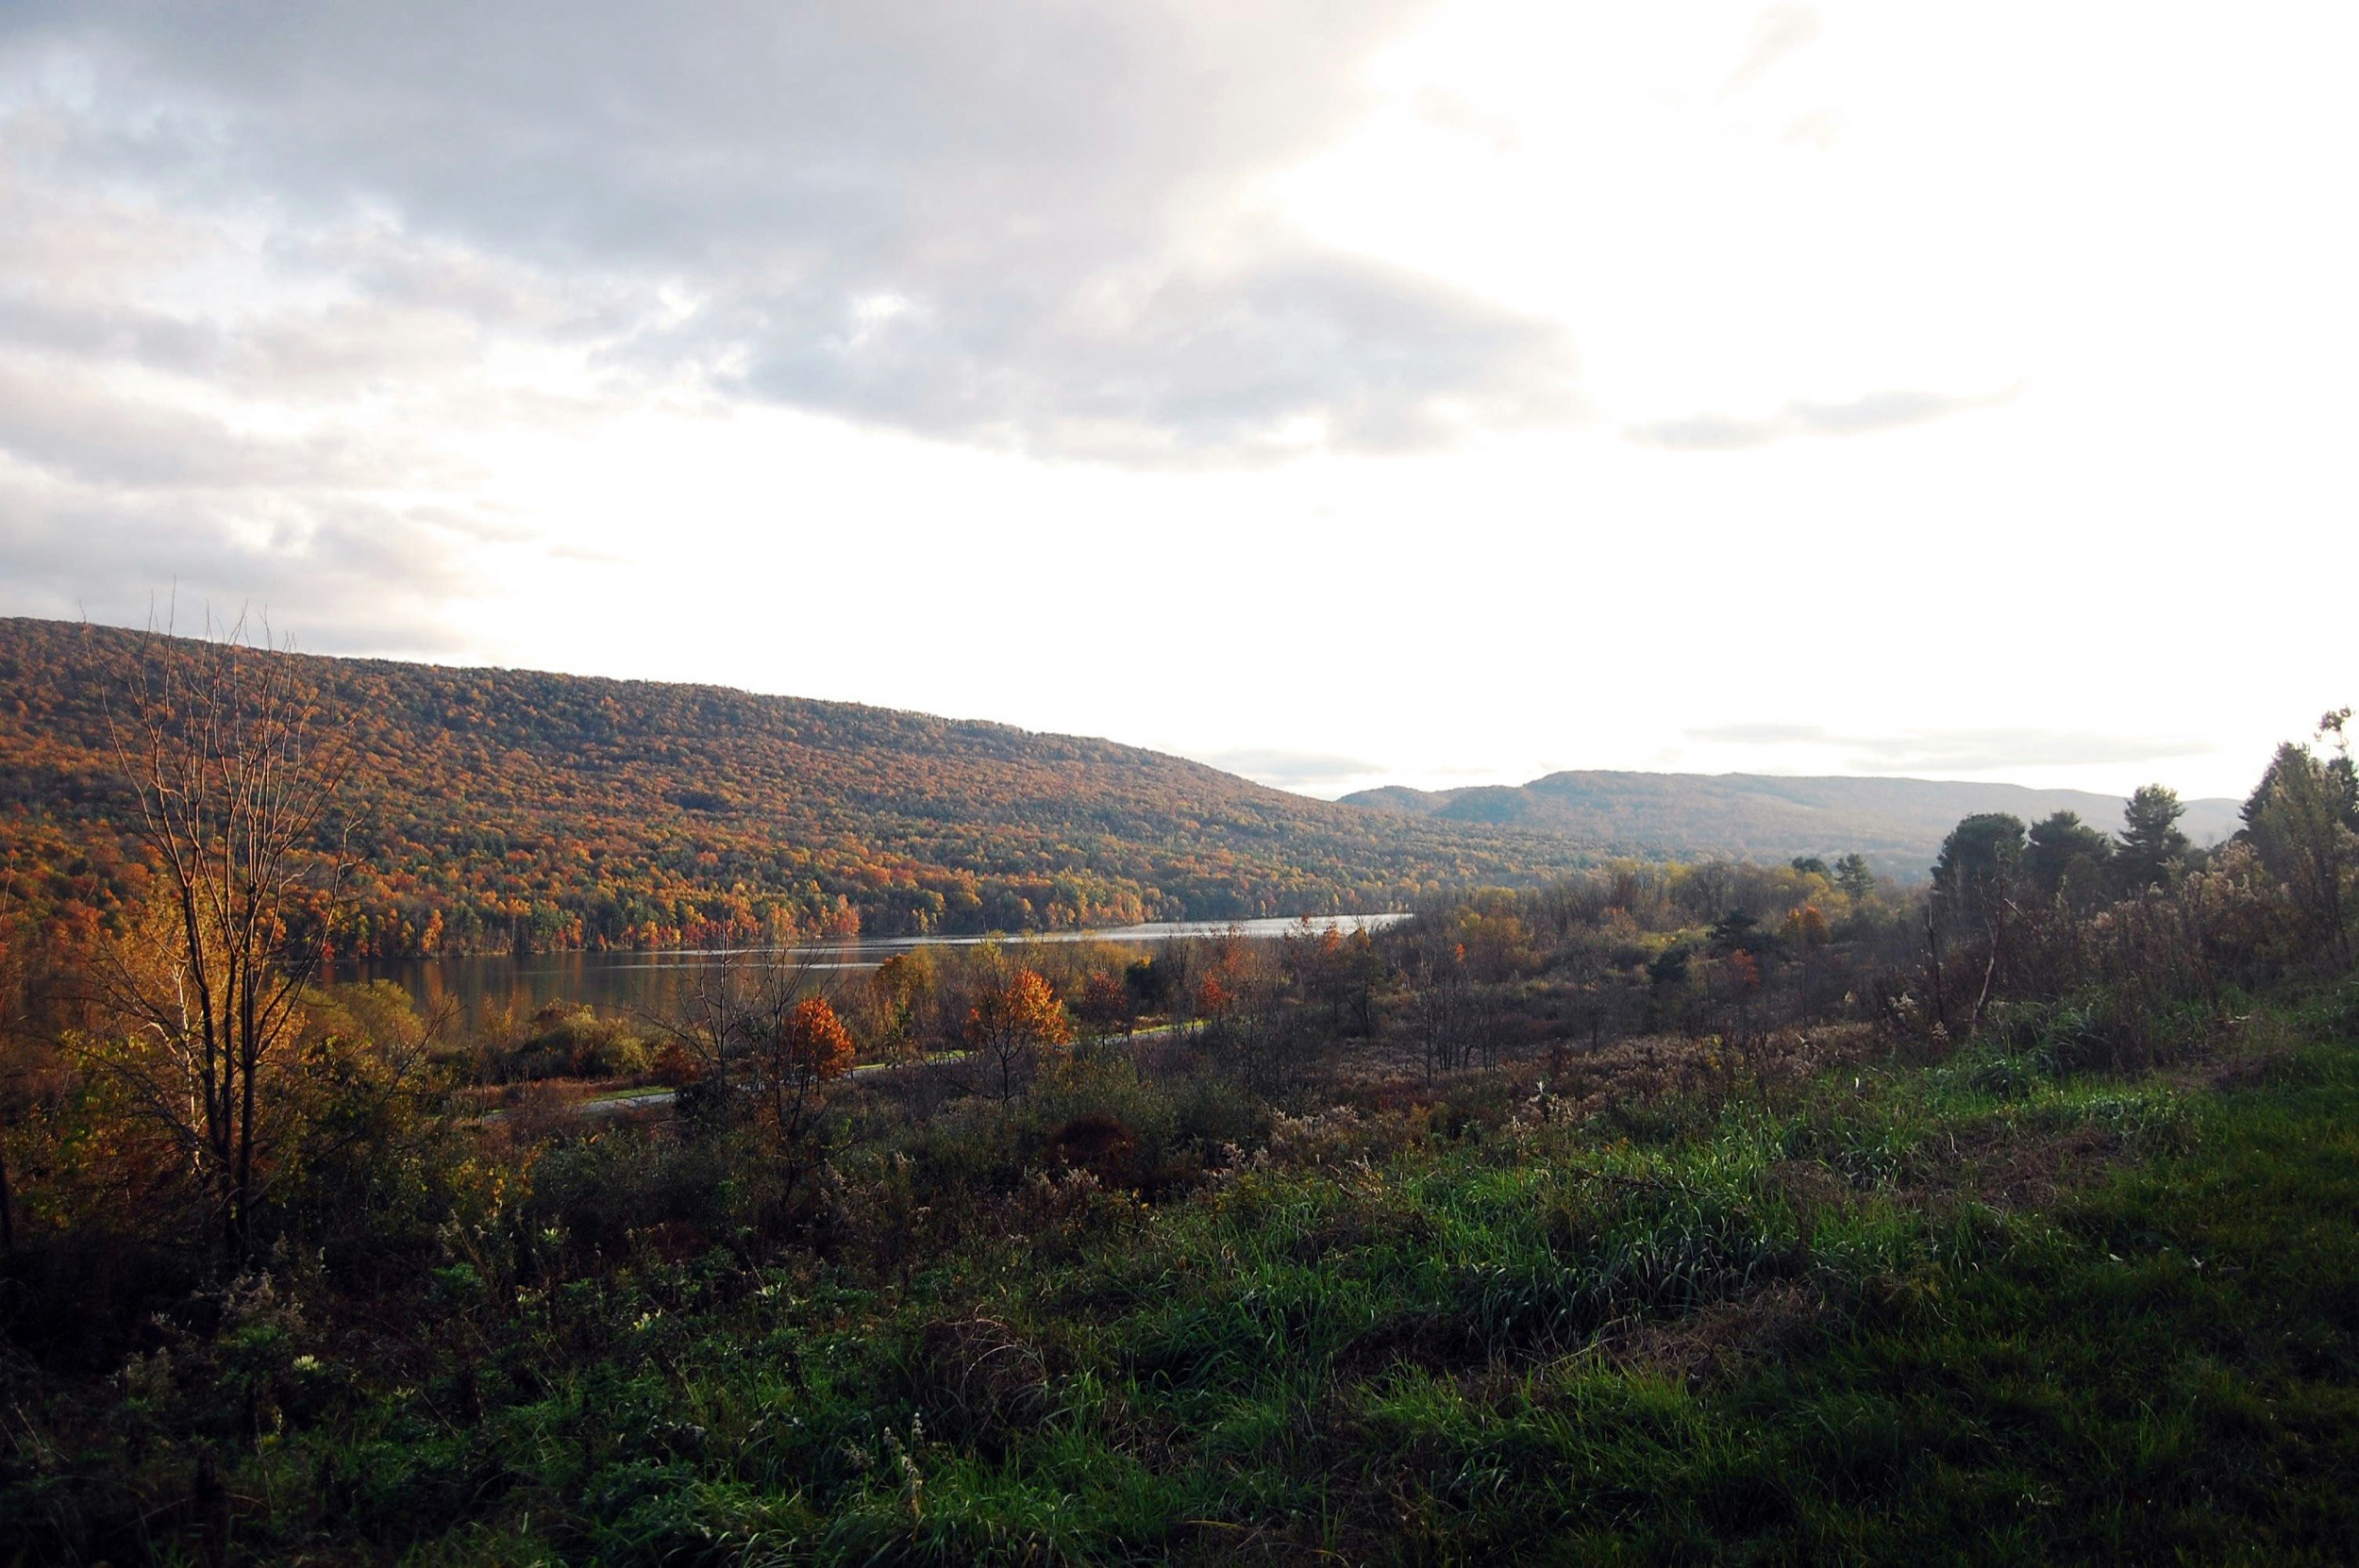 A river runs below a hill or low mountain covered in fall foliage; Fall in State College Pennsylvania